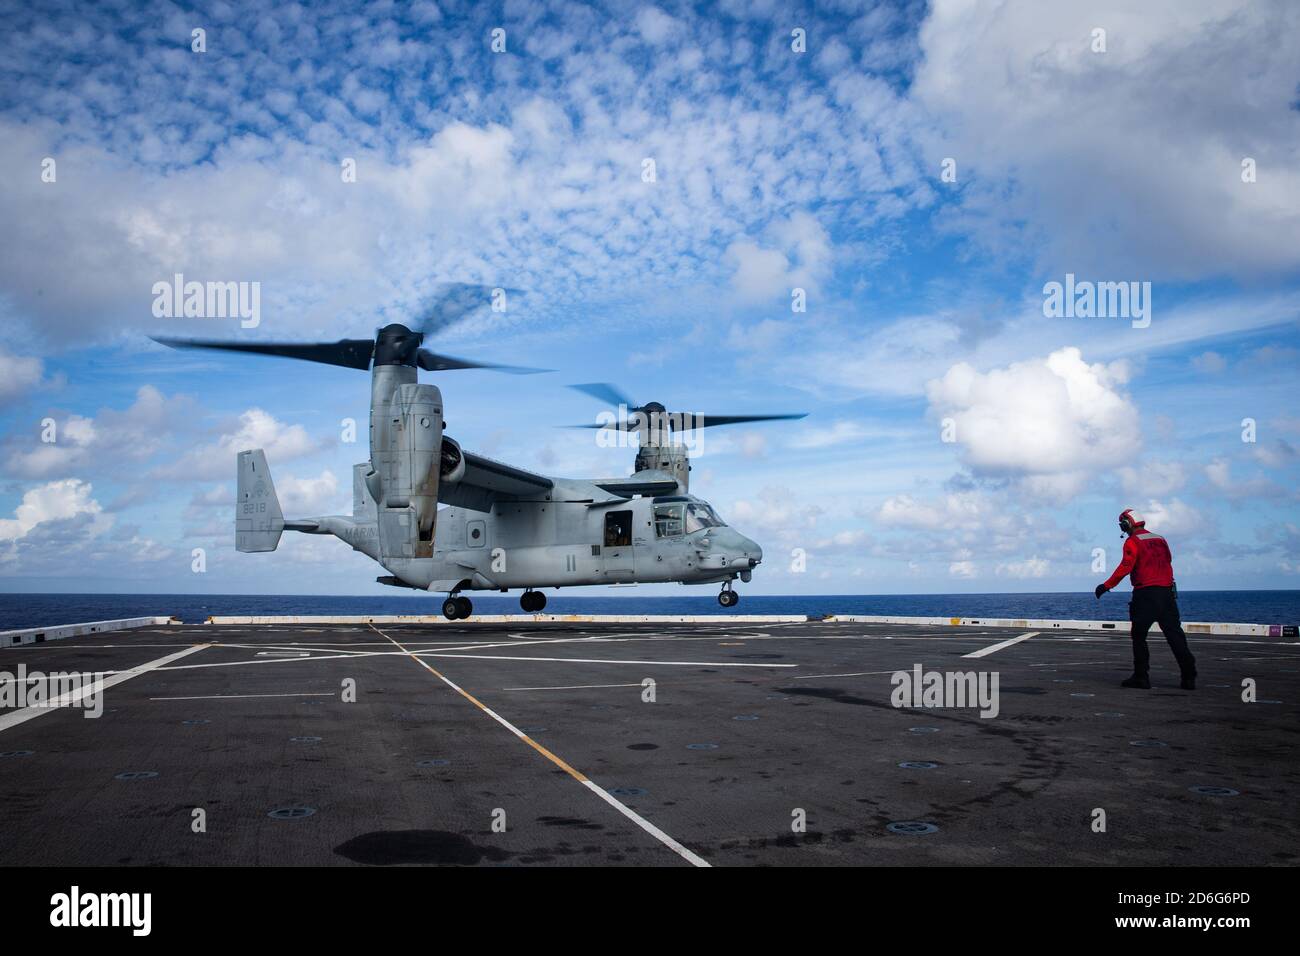 PHILIPPINE SEA (Aug. 24, 2020) A MV22B Tiltrotor aircraft with Marine Medium Tiltrotor Squadron 262 (Reinforced), 31st Marine Expeditionary Unit (MEU), prepares to land on USS New Orleans (LPD 18).  New Orleans part of the America Amphibious Ready Group (ARG), 31st MEU team, is operating in the U.S. 7th Fleet area of operation to enhance interoperability with allies and partners and serve as a ready response force to defend peace and stability in the Indo-Pacific region. The America ARG, 31st MEU team remains the premier crisis response force in the region despite the unique challenges caused Stock Photo